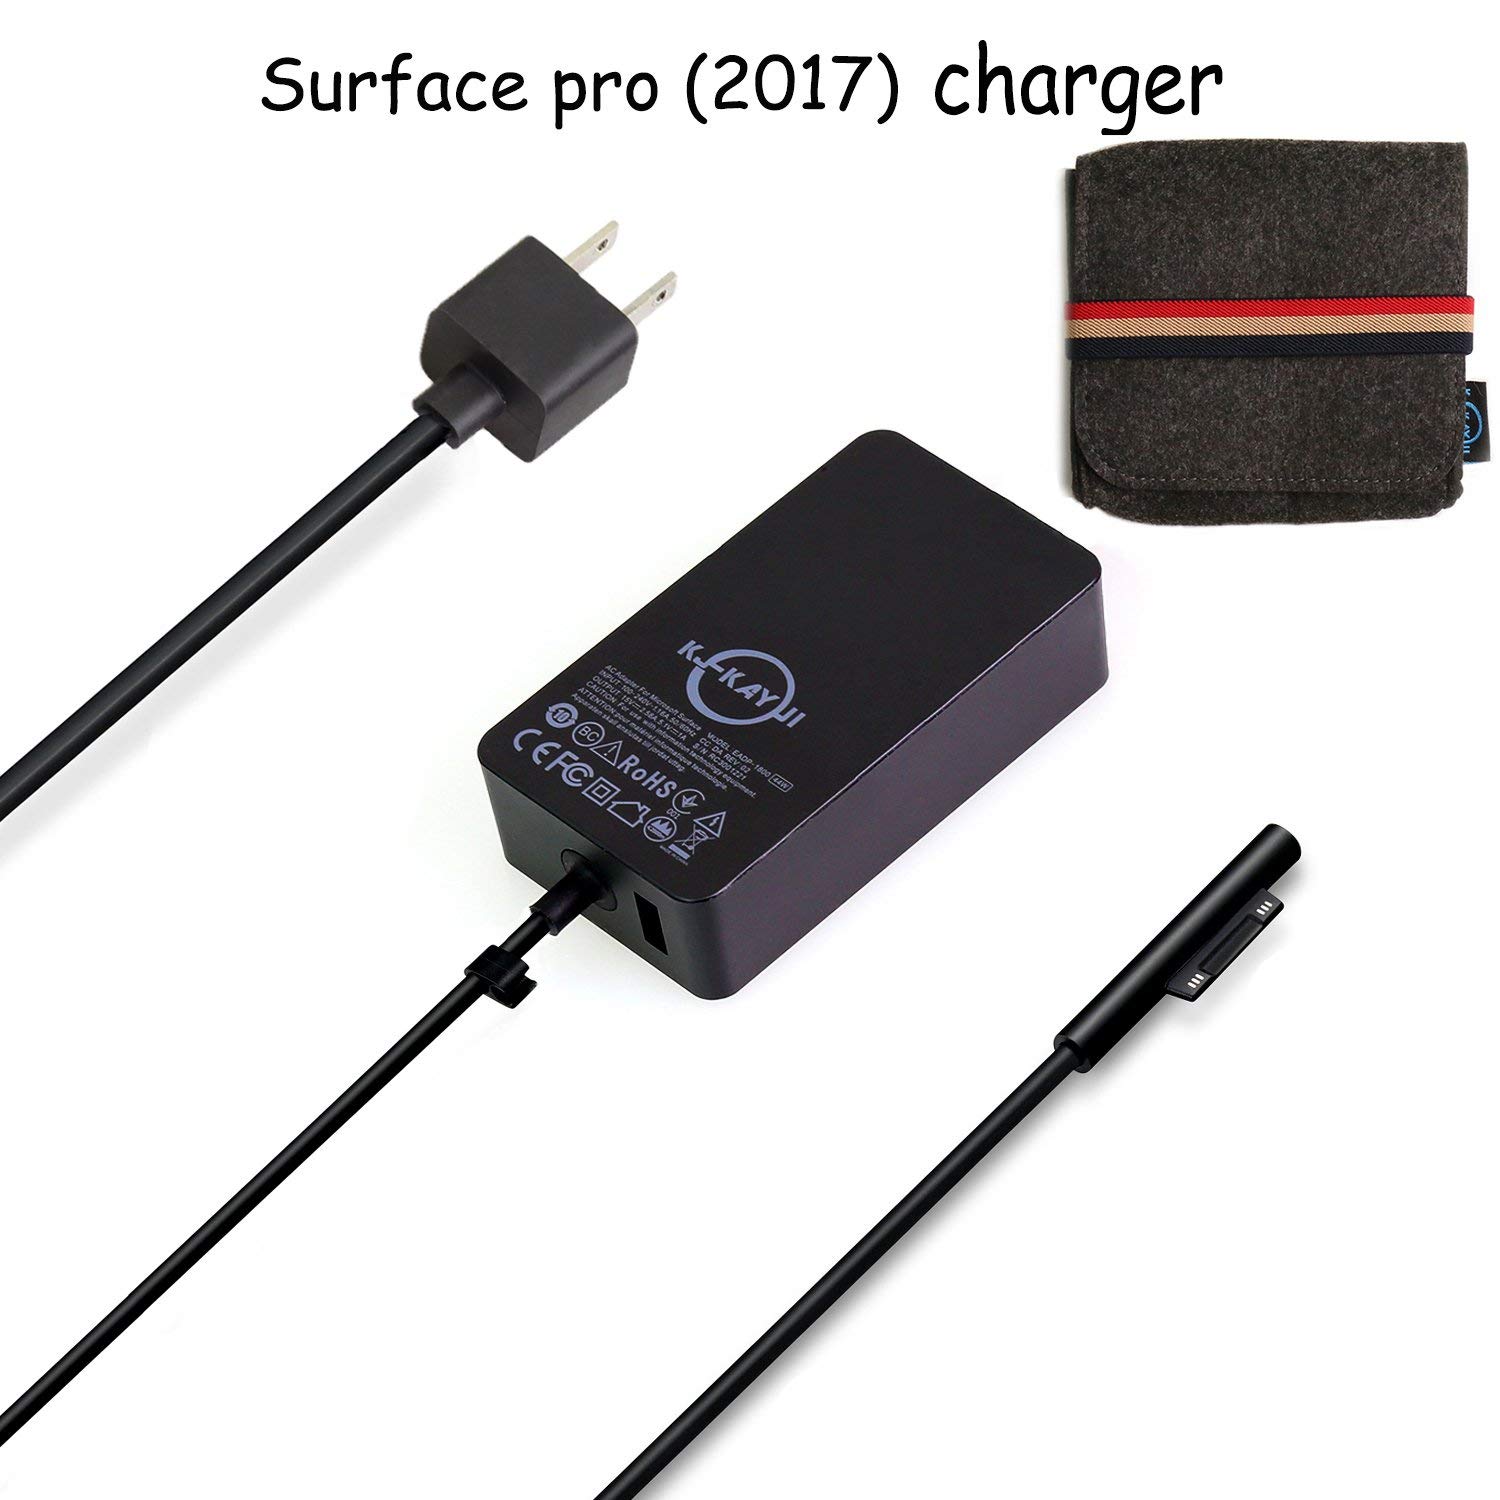 Surface pro 5 Surface pro (2017) Surface Laptop&tablet charger, 44w 15V 2.58A supply adapter,Surface pro3 pro 4 & Surface Book Adapter charger with 6.2Ft Power Cord cable and a storage pouch - image 1 of 8